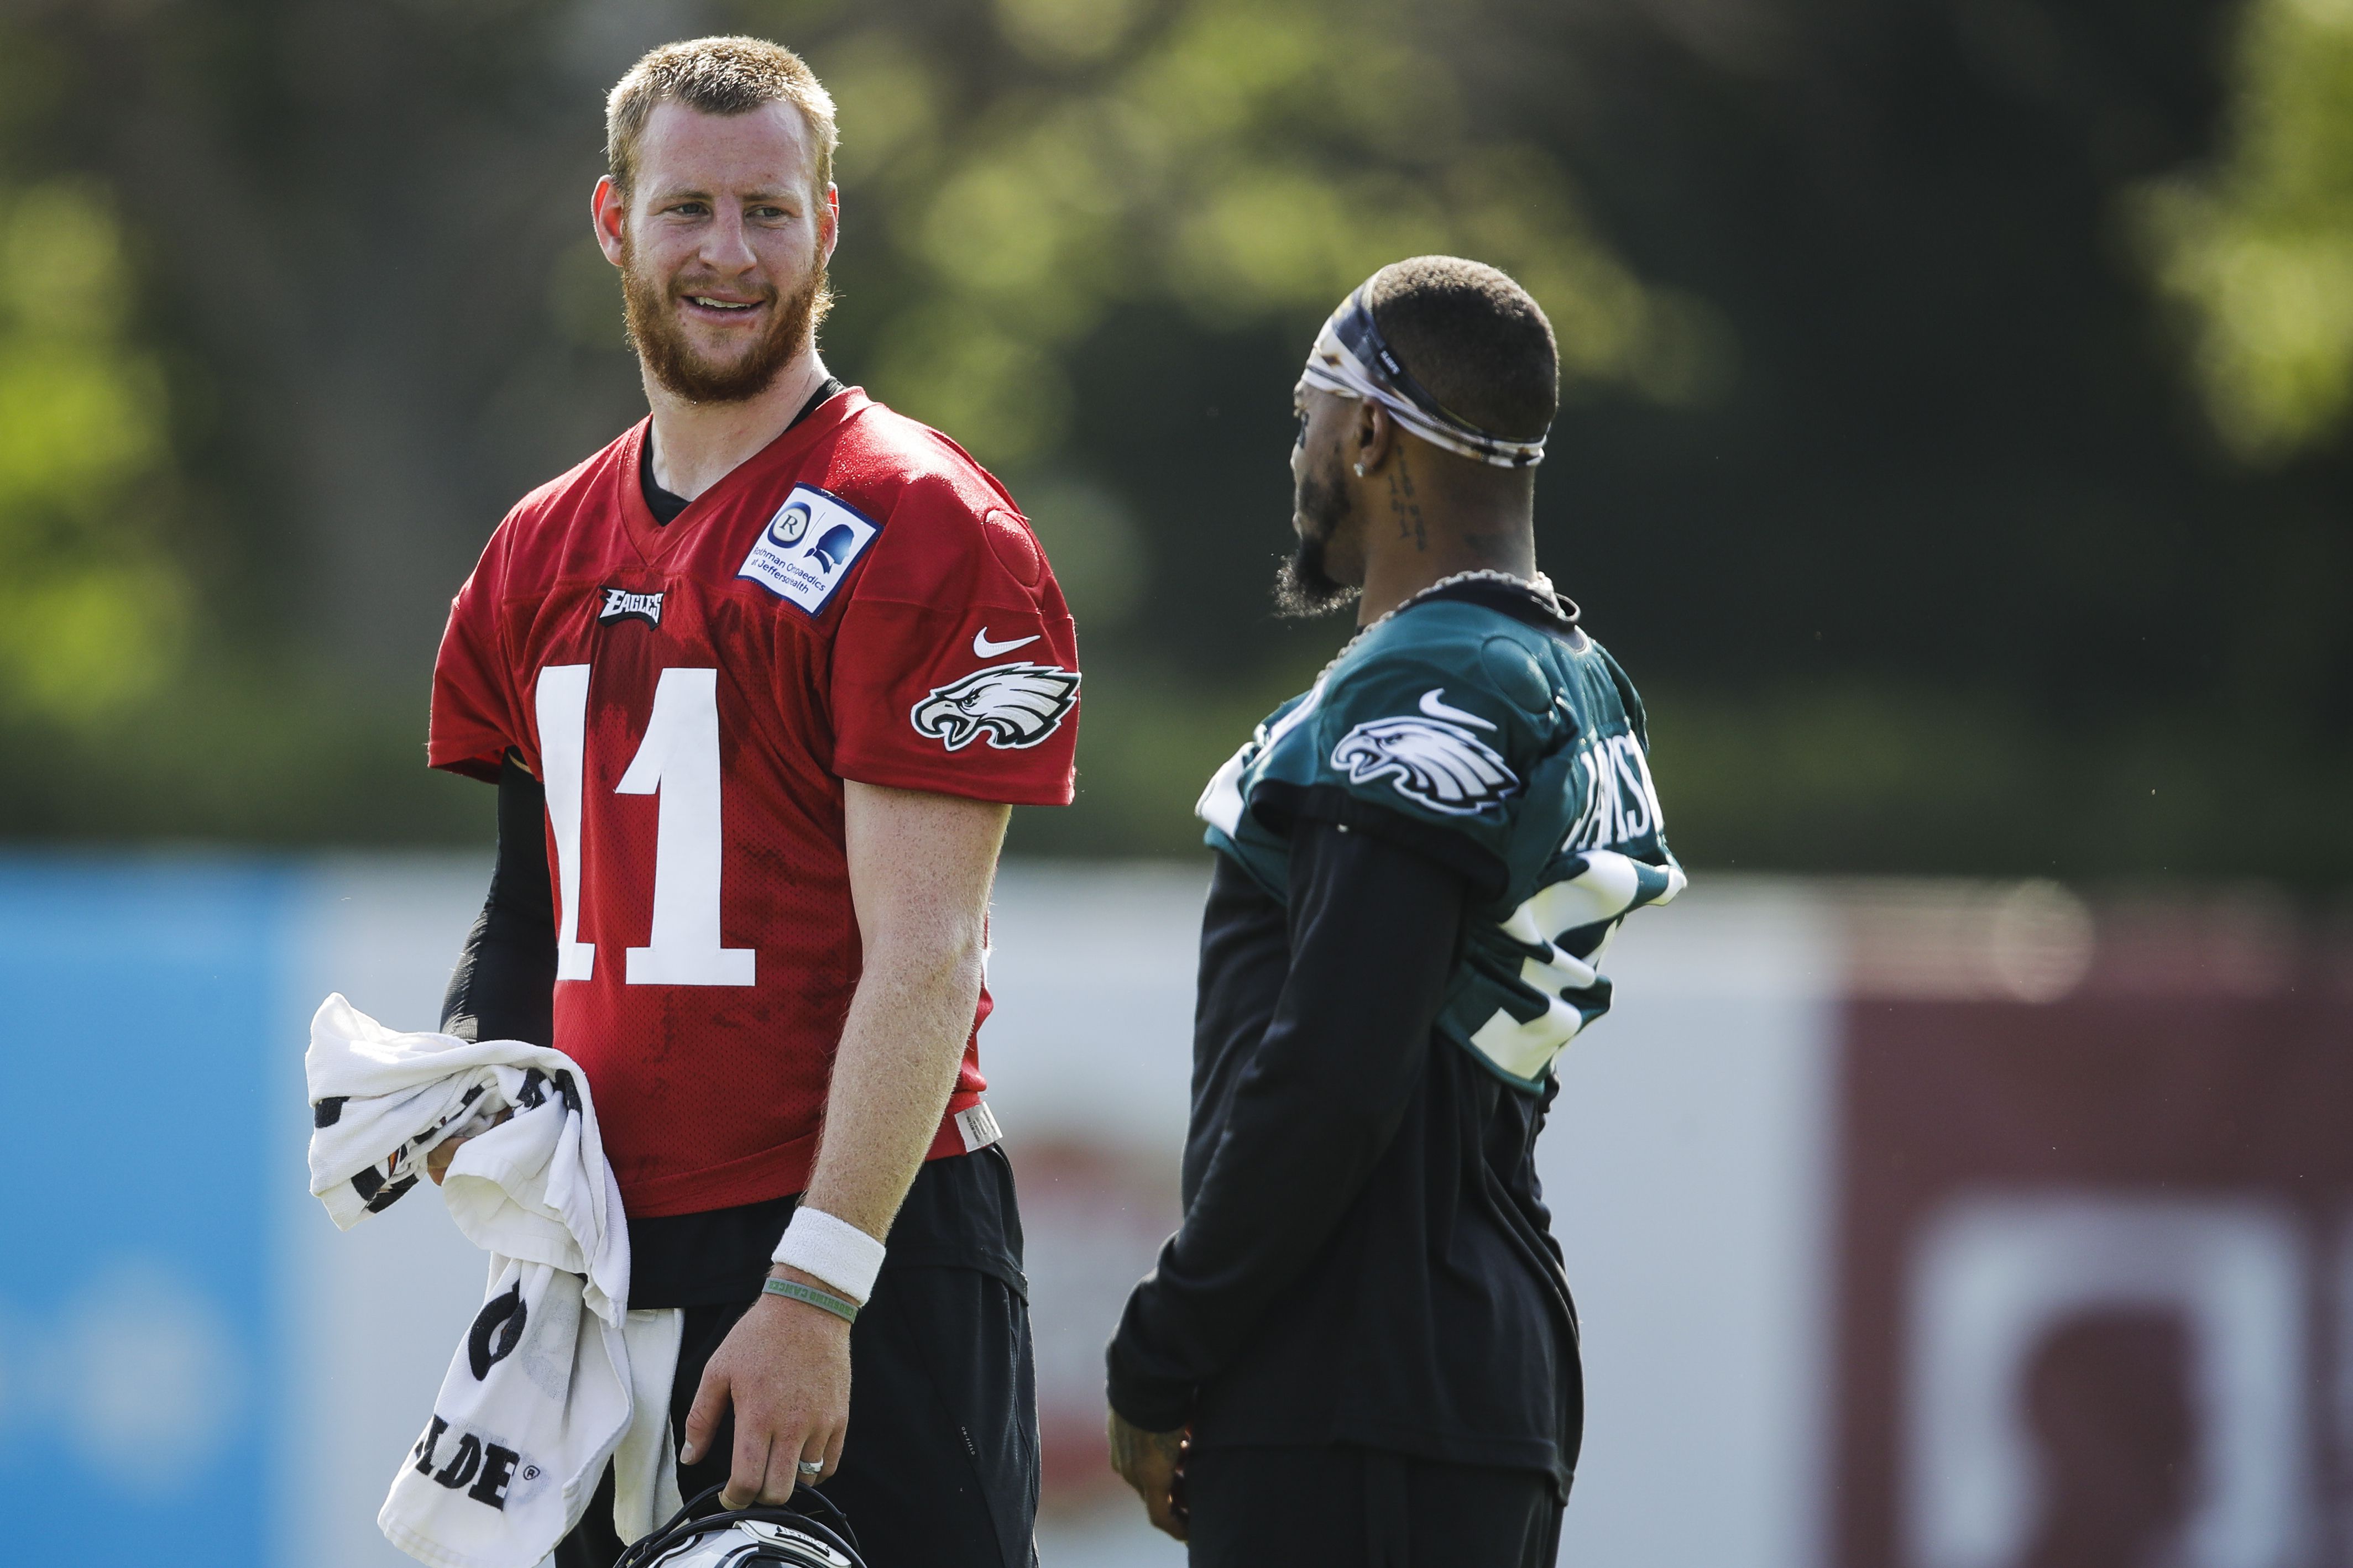 Photos from the second Saturday of Eagles training camp